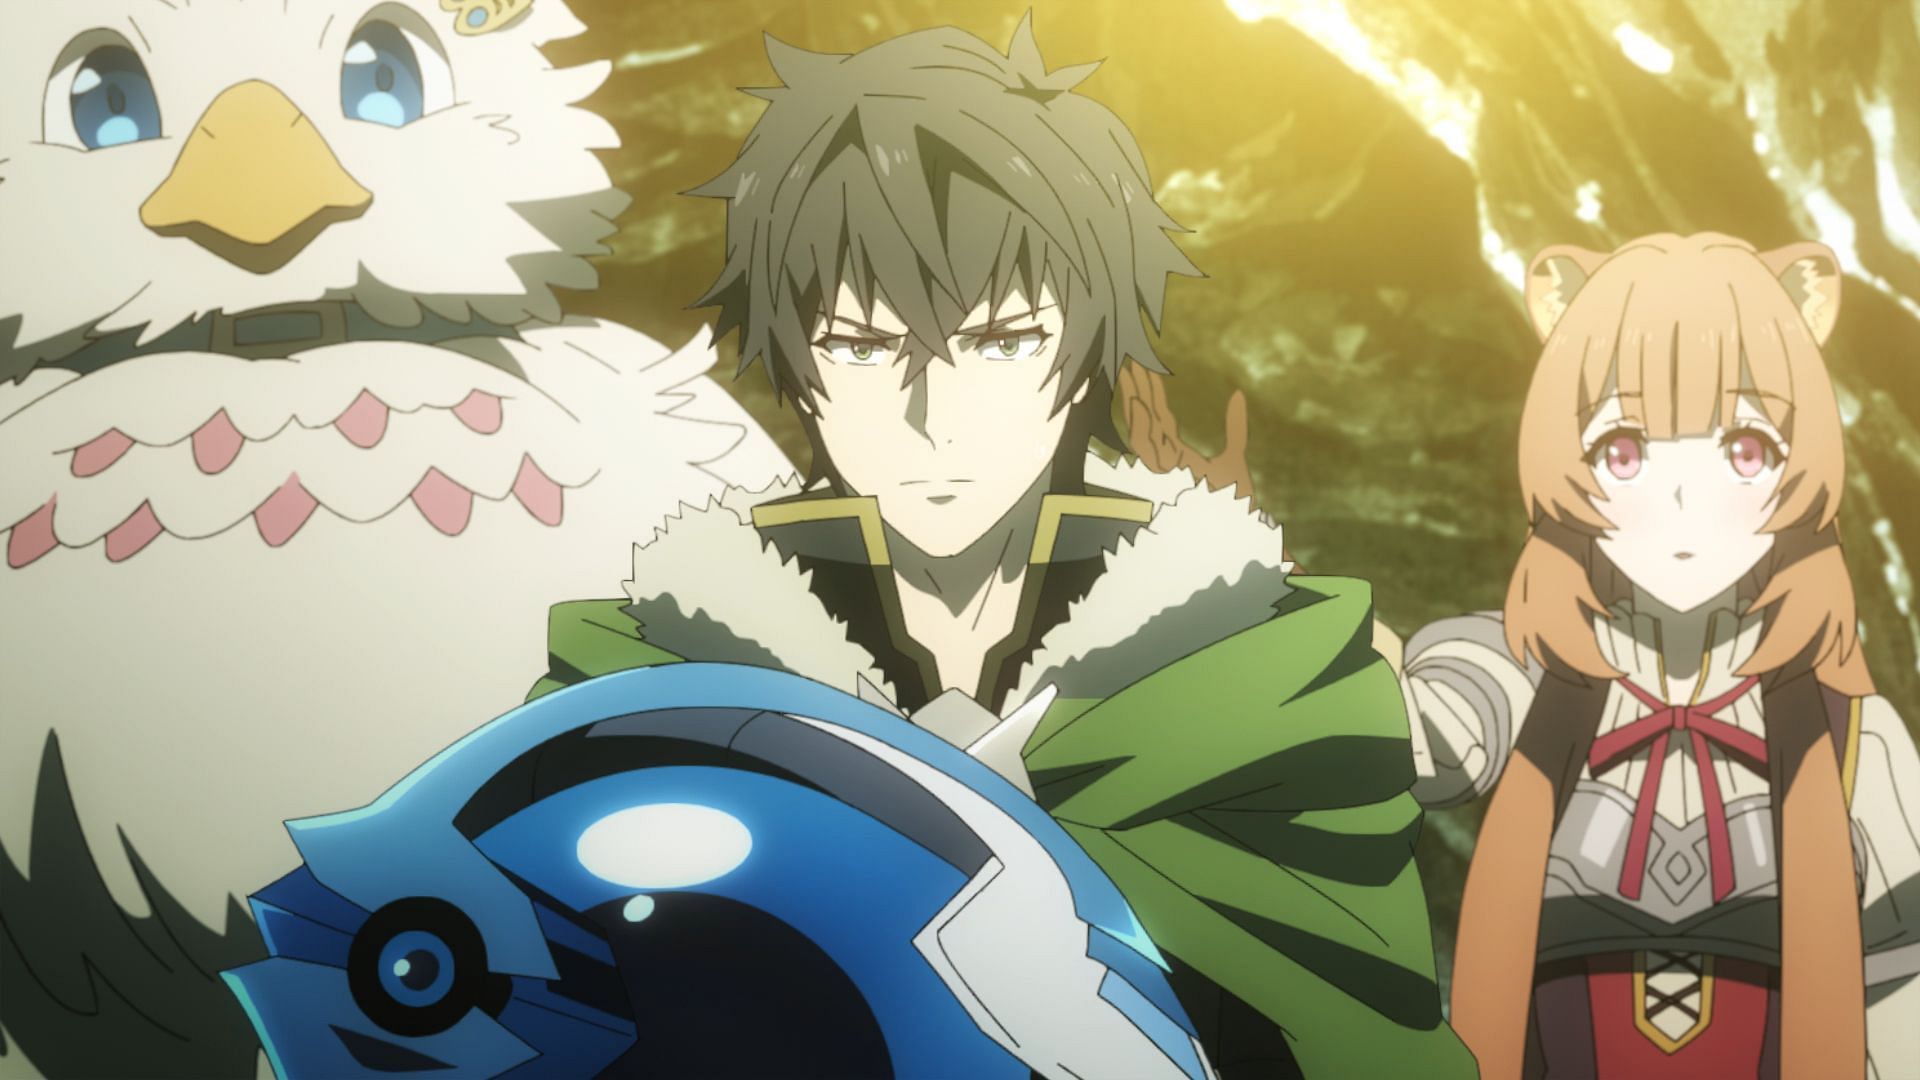 Viewers everywhere hope Rising of the Shield Hero season 2 episode 8 can set the sequel series up to end on a high-note (Image via Kinema Citrus)